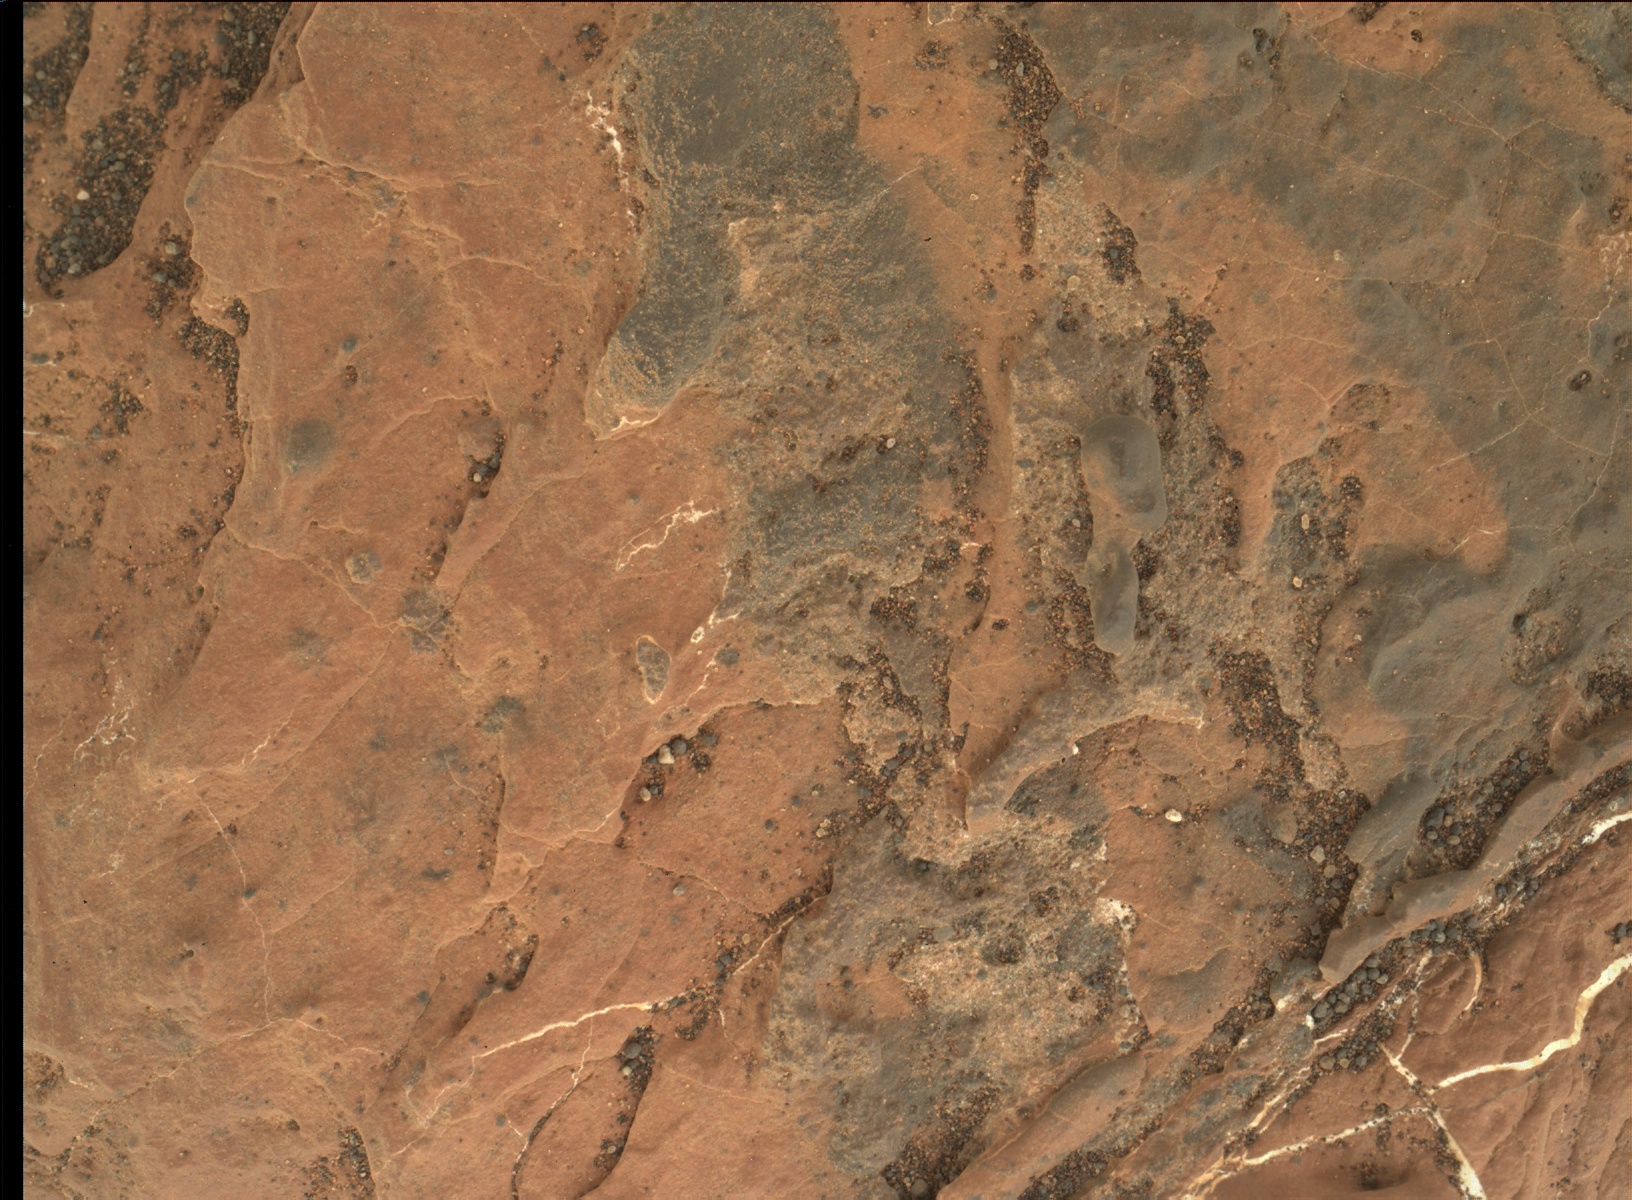 Nasa's Mars rover Curiosity acquired this image using its Mars Hand Lens Imager (MAHLI) on Sol 1611